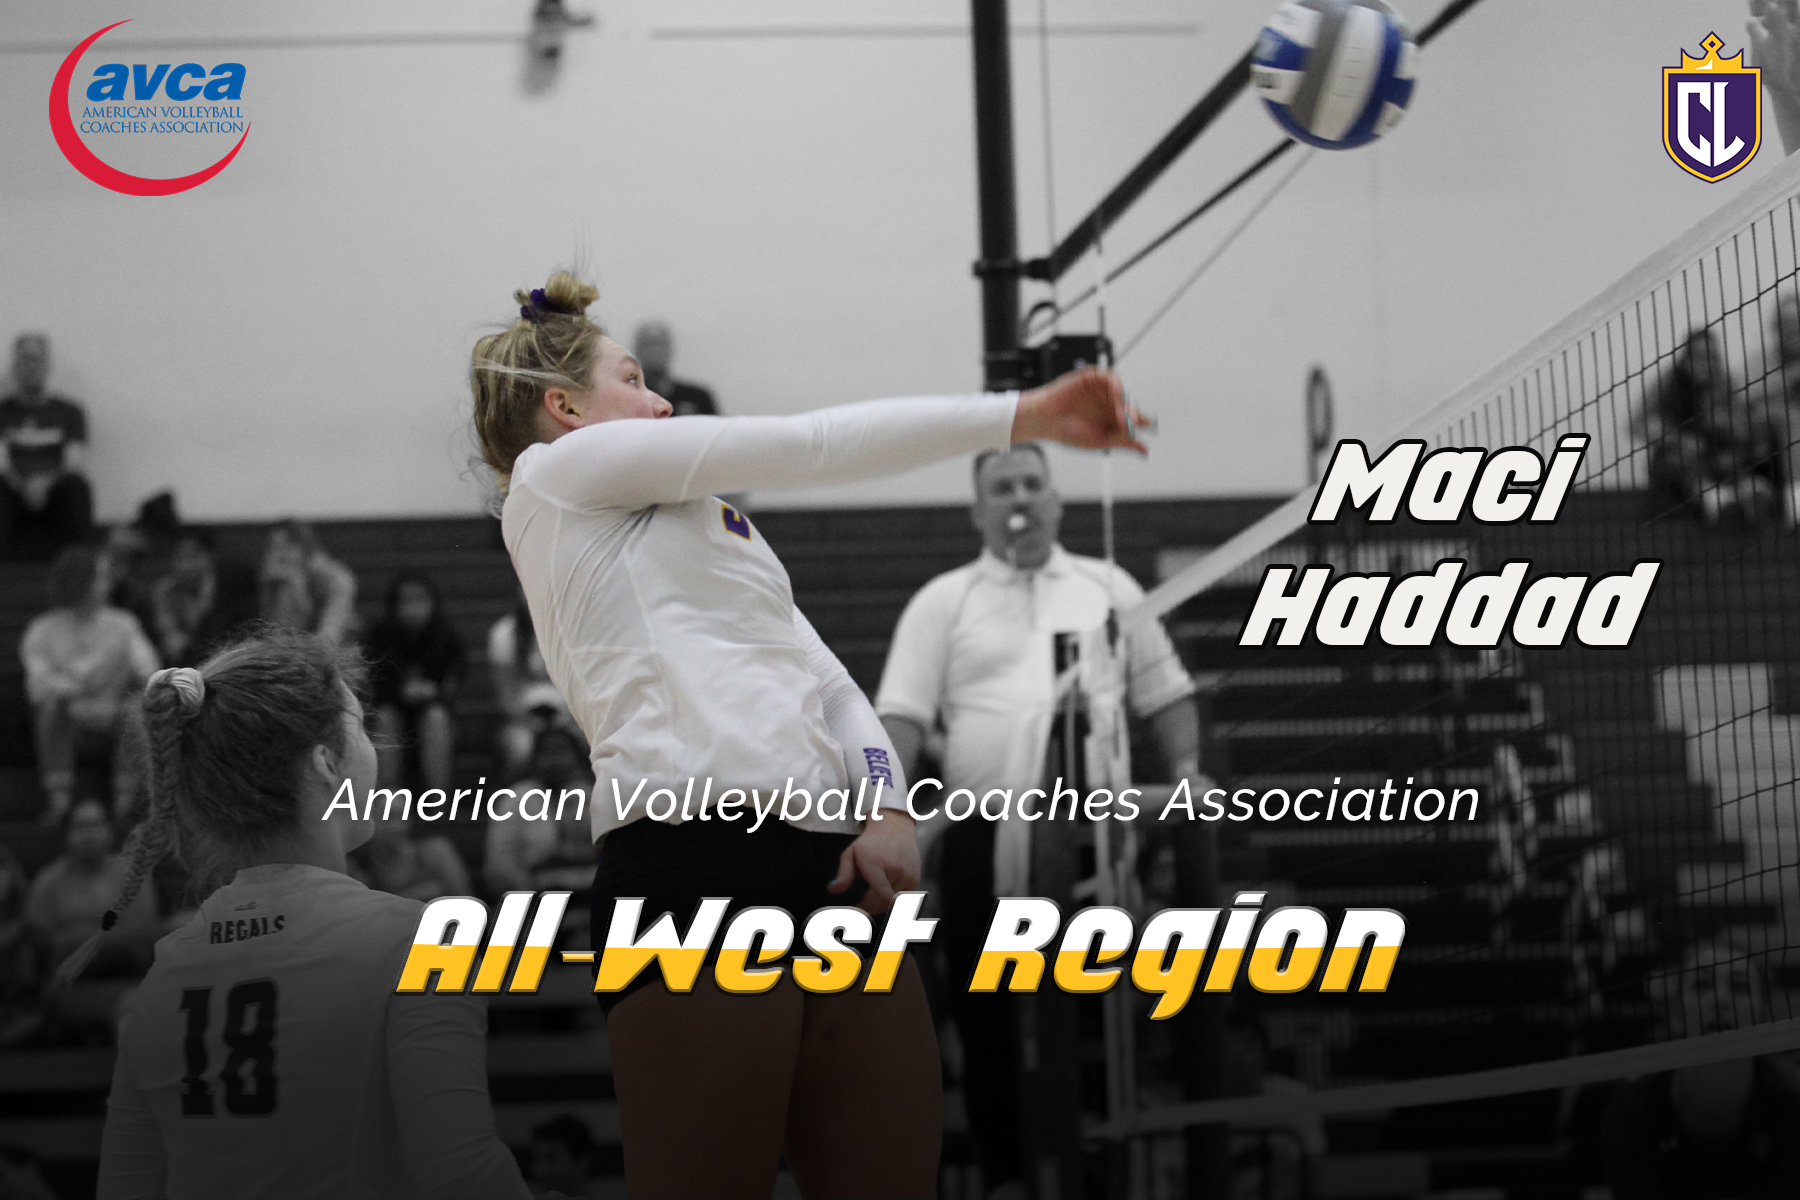 Haddad Selected All-West Region for Second Consecutive Season